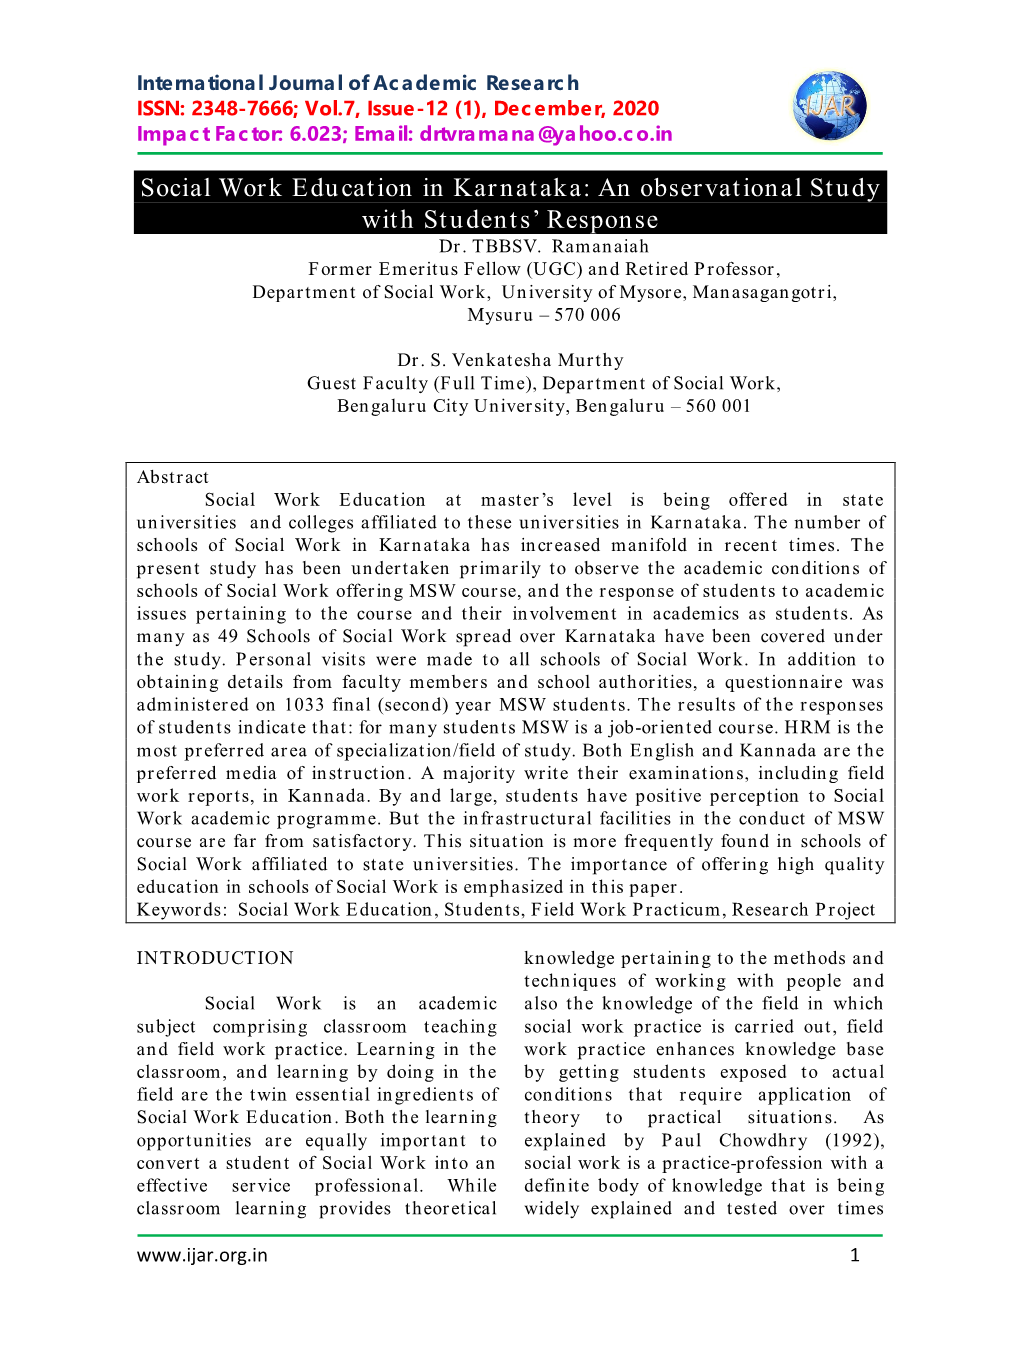 Social Work Education in Karnataka: an Observational Study with Students’ Response Dr